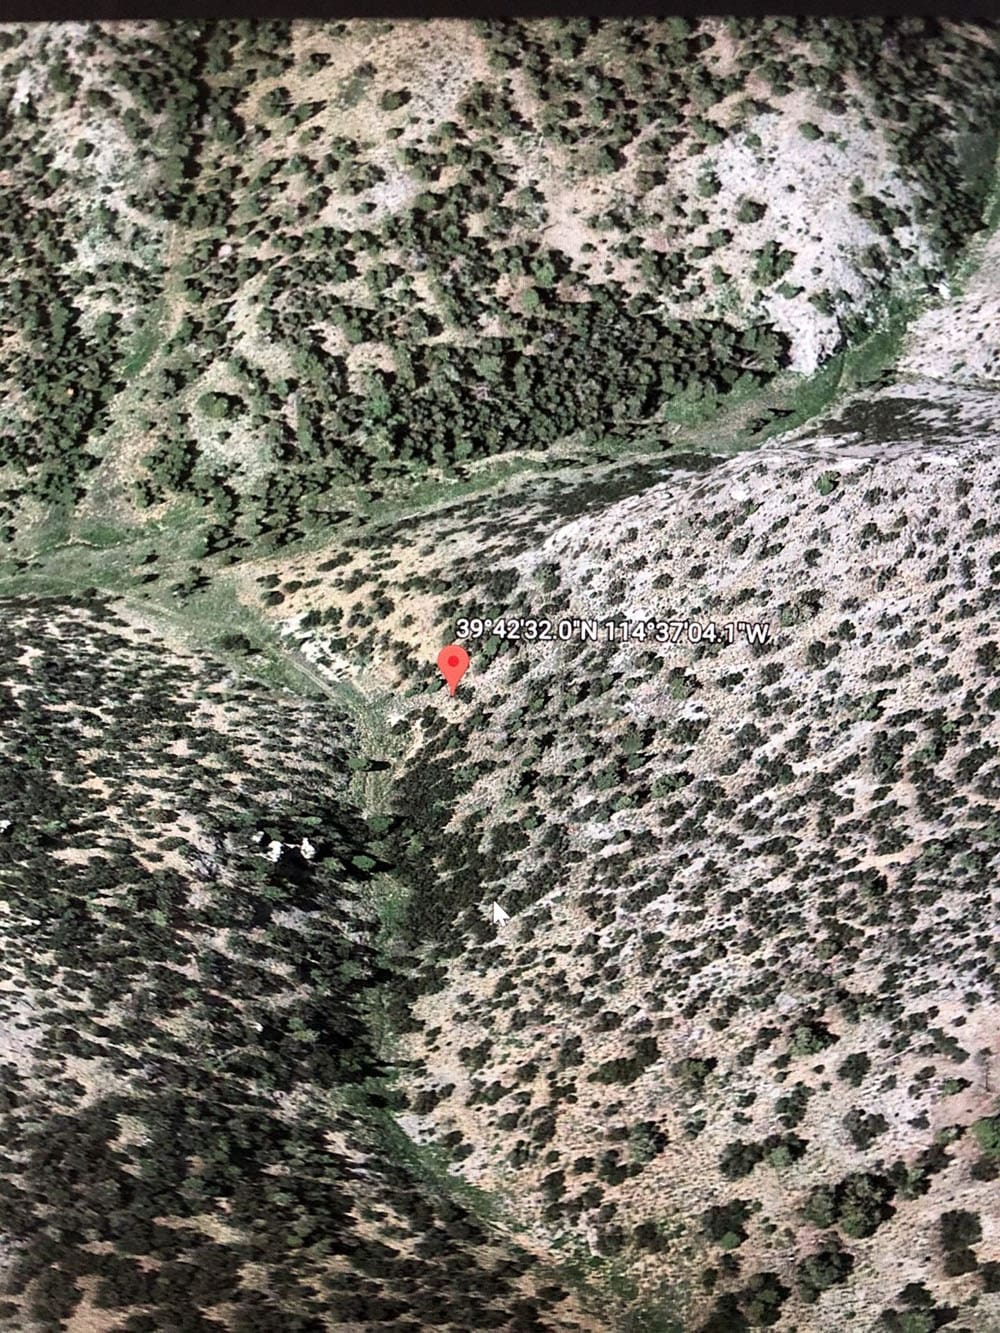 `10.33 ACRES~Patented Mining Claim “Buckhorn” SUR 38S, Silver Canyon Mining District 11,000 feet Elevation in SCHELL CREEK RANGE photo 1